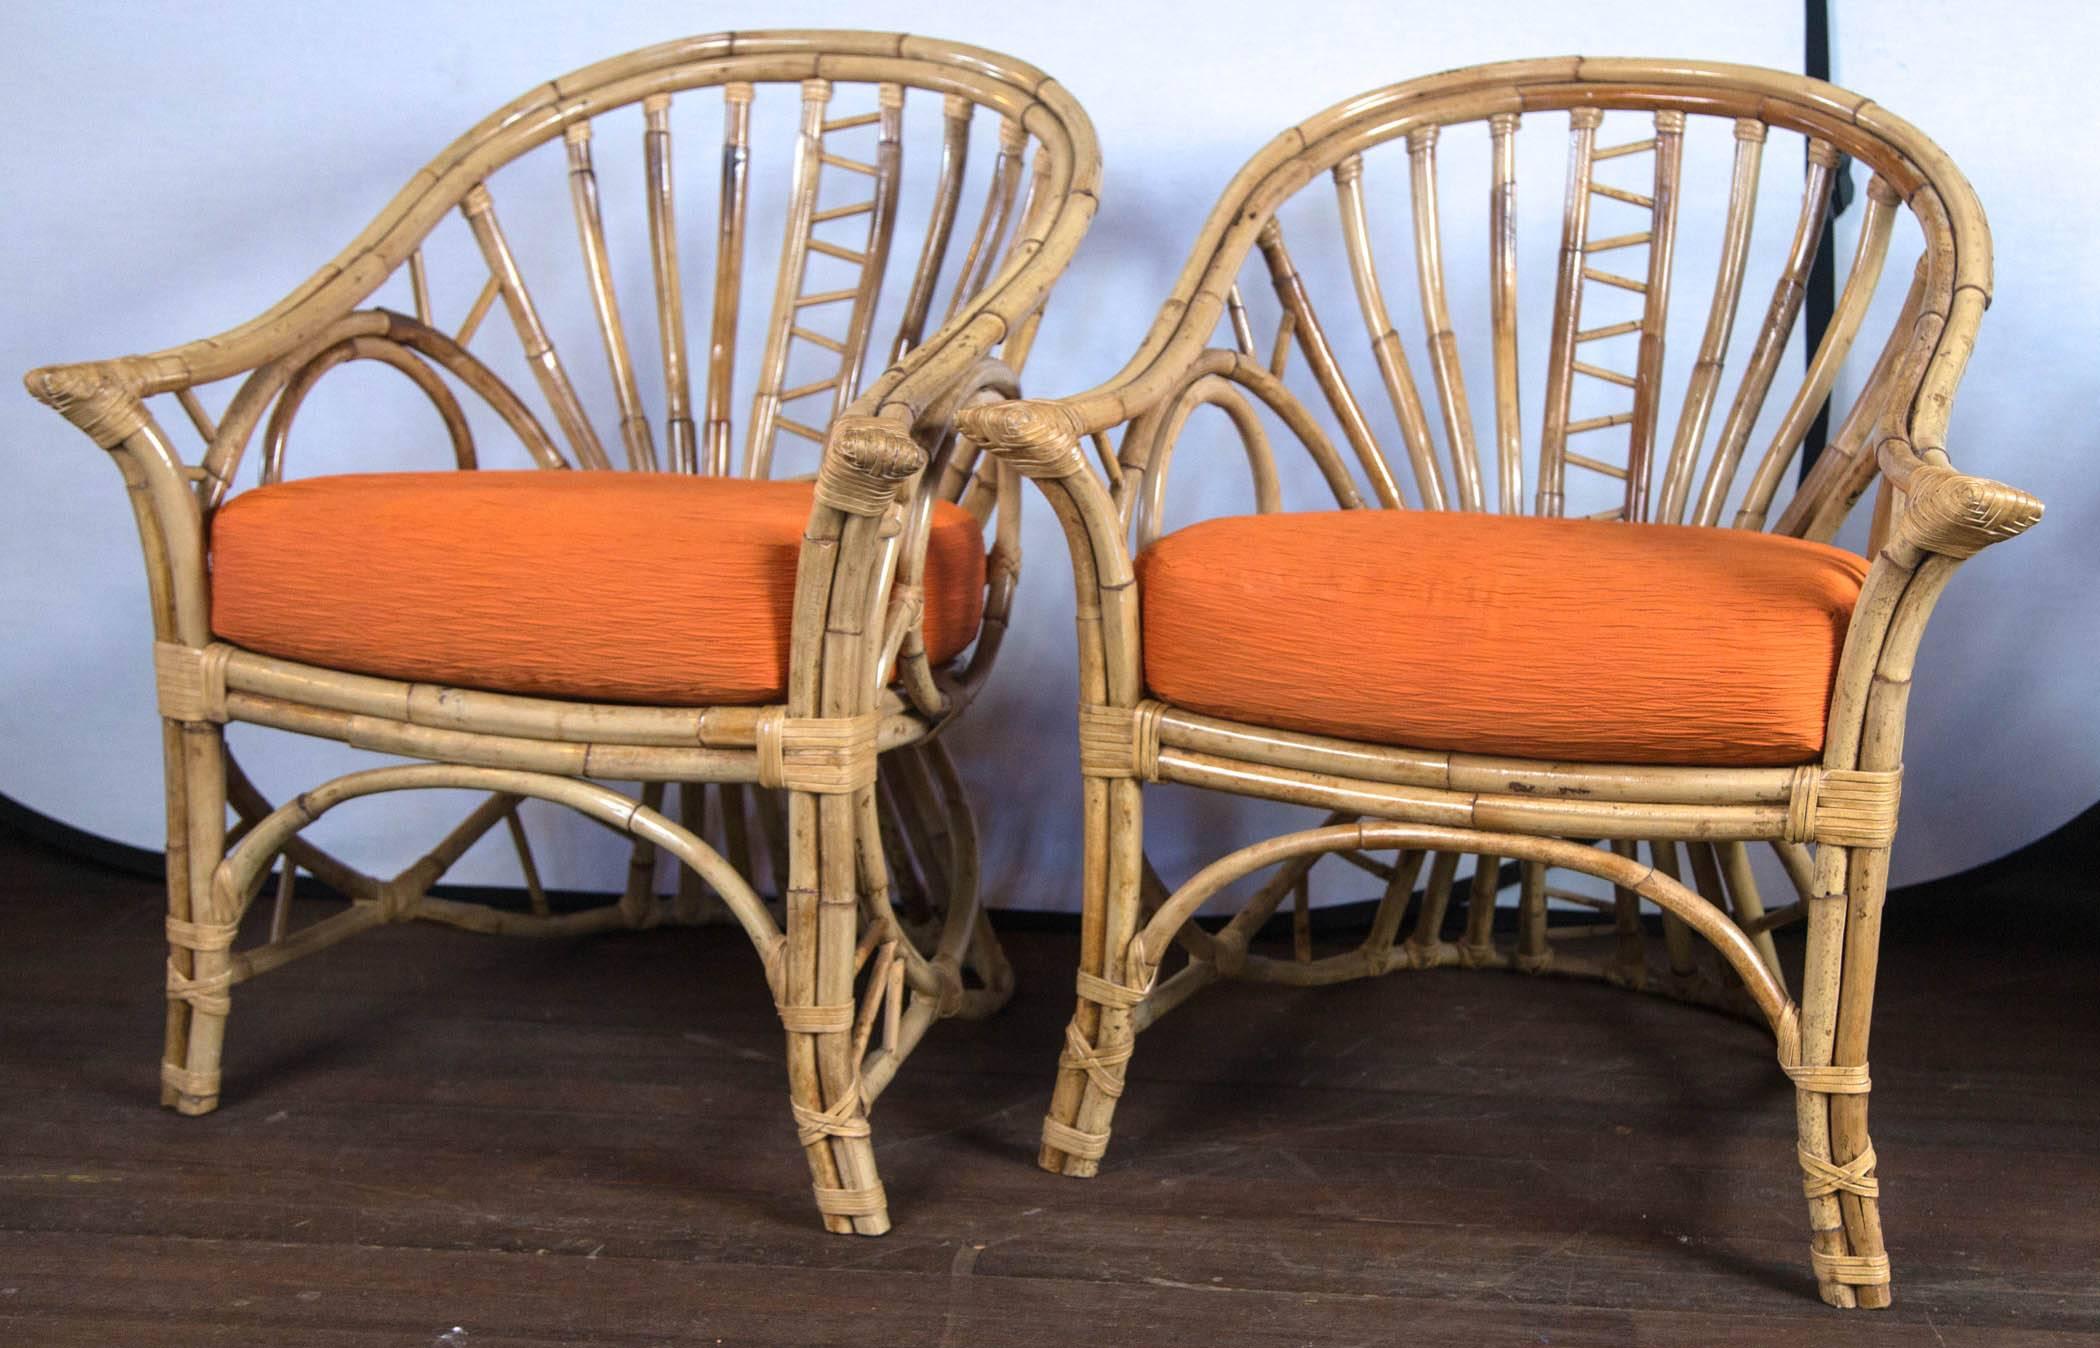 Pair of gracefully curved back rattan arm chairs with corset backs and circle sides. Two orange cushions.